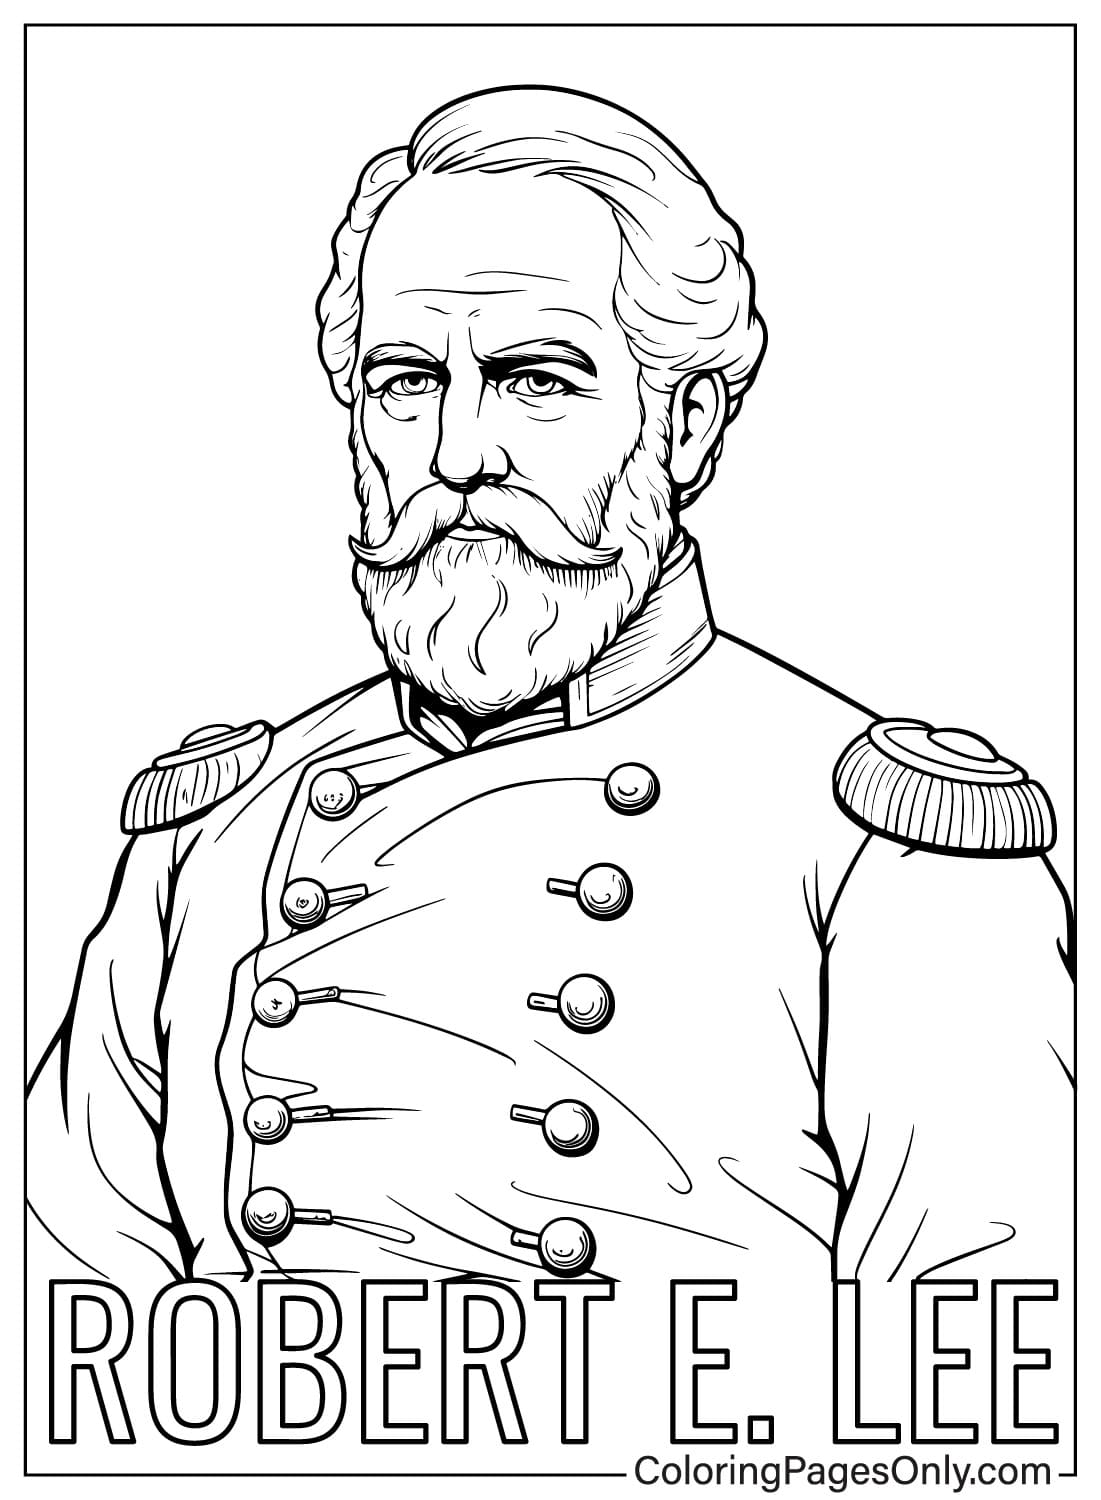 Robert e lee coloring pages